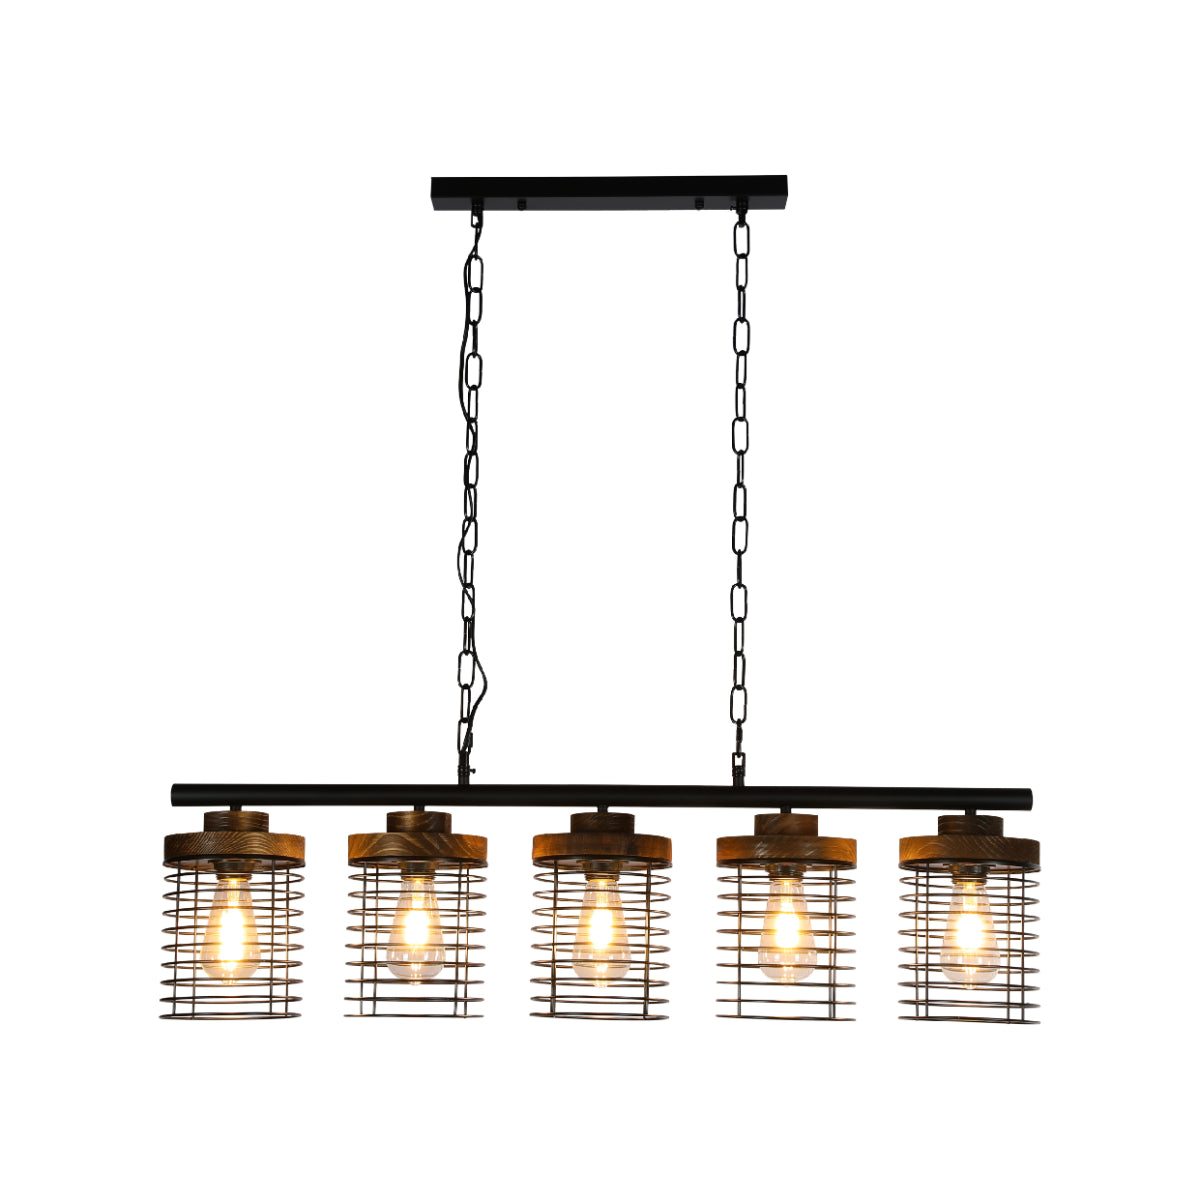 Main image of Industrial Cage Pendant Light - Rectangular 5-Shade Linear Chandelier with Wood Accents 150-19066